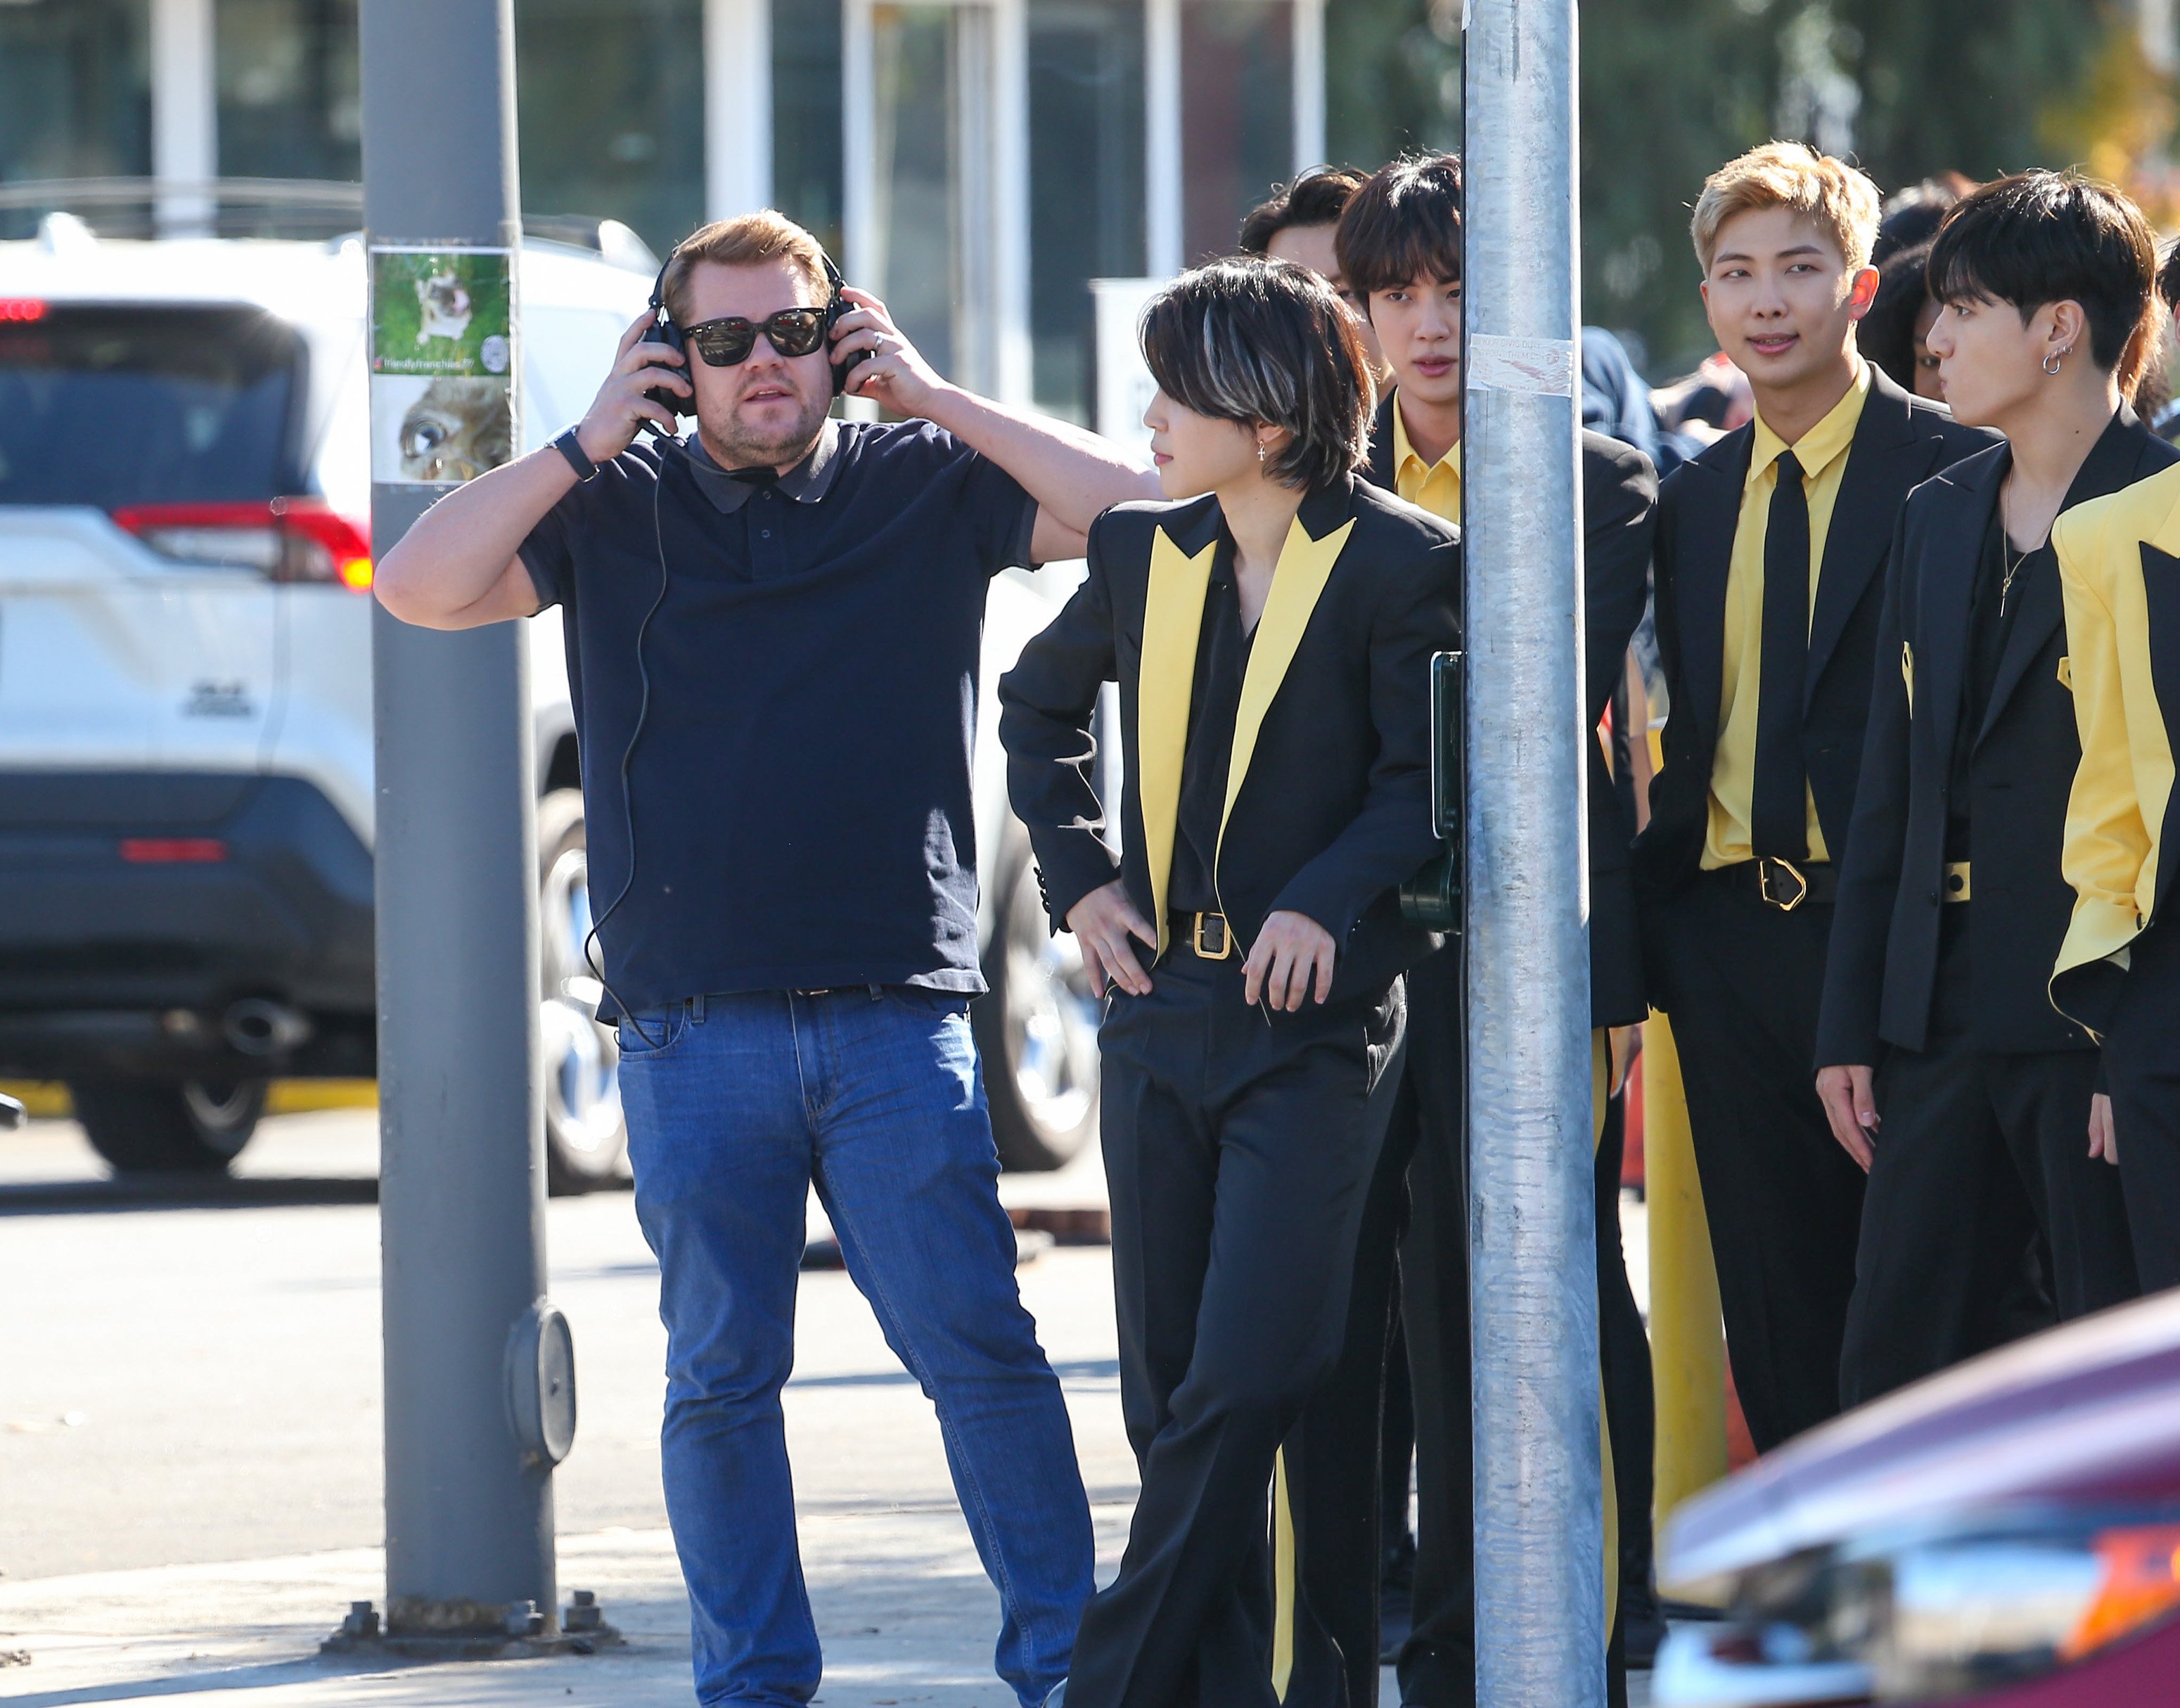 James Corden is seen with Jiman, Jin, RM and Jungkook of the K-Pop band BTS